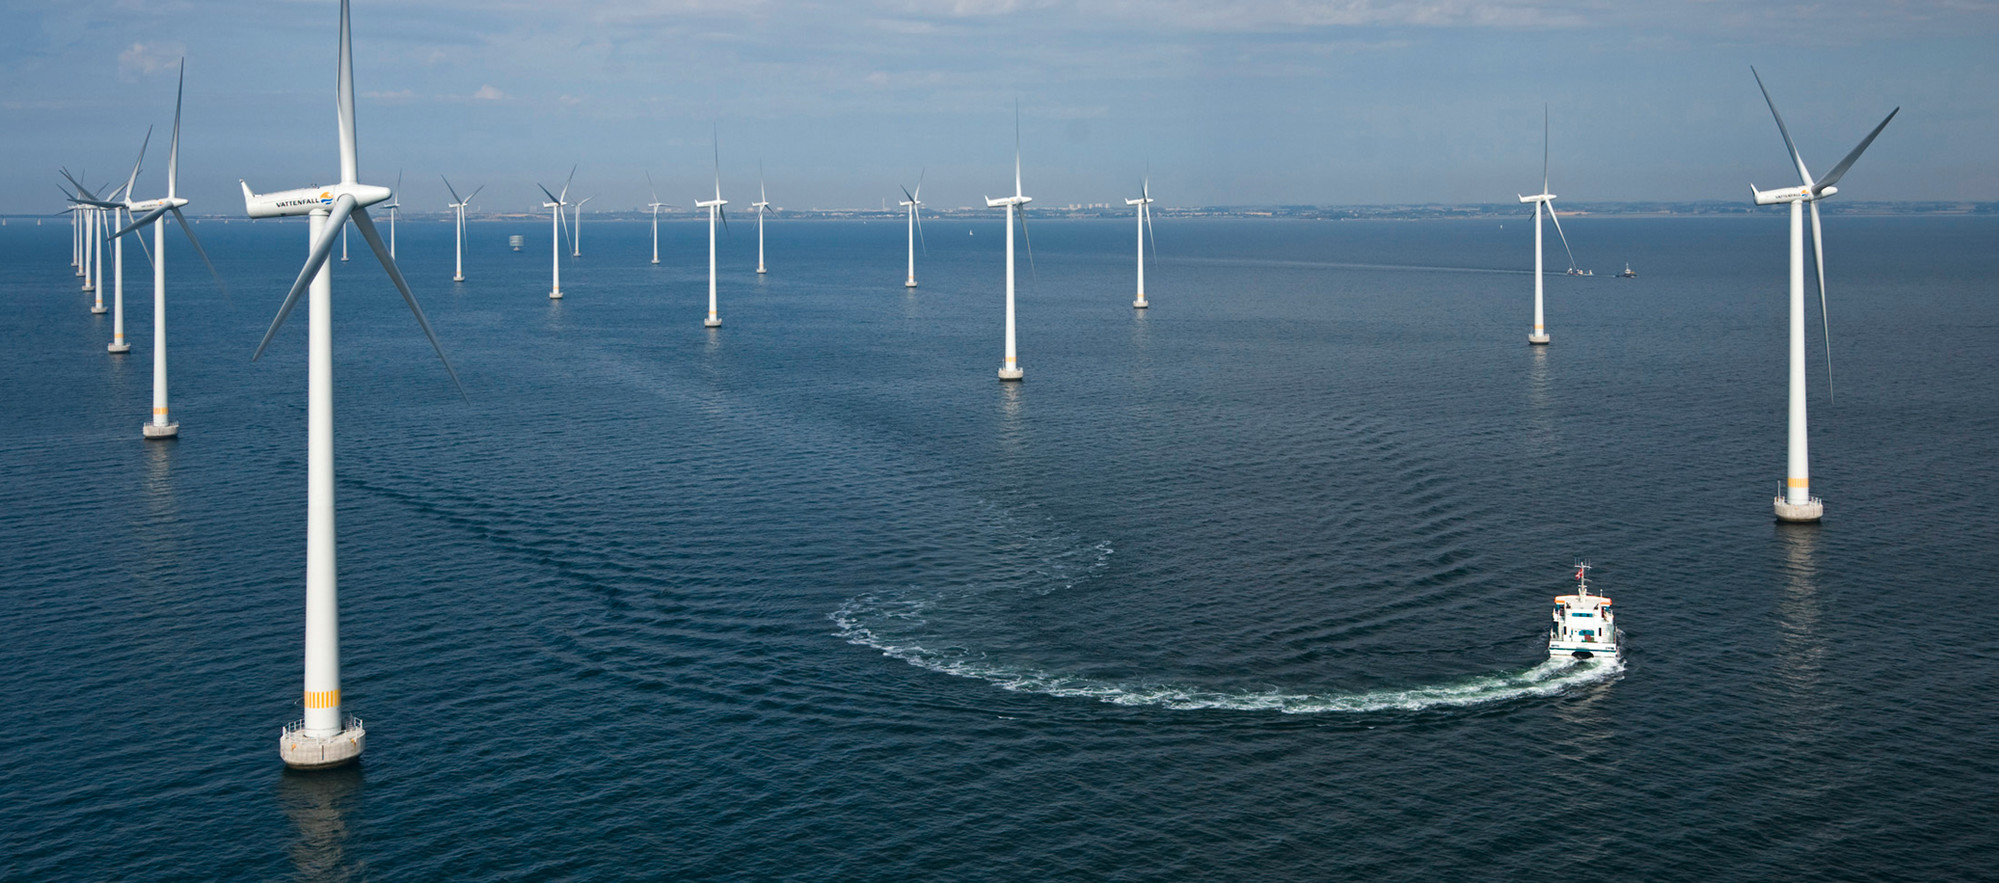 An offshore wind farm off Rhode Island is expected to be completed this year, the first in the United States.